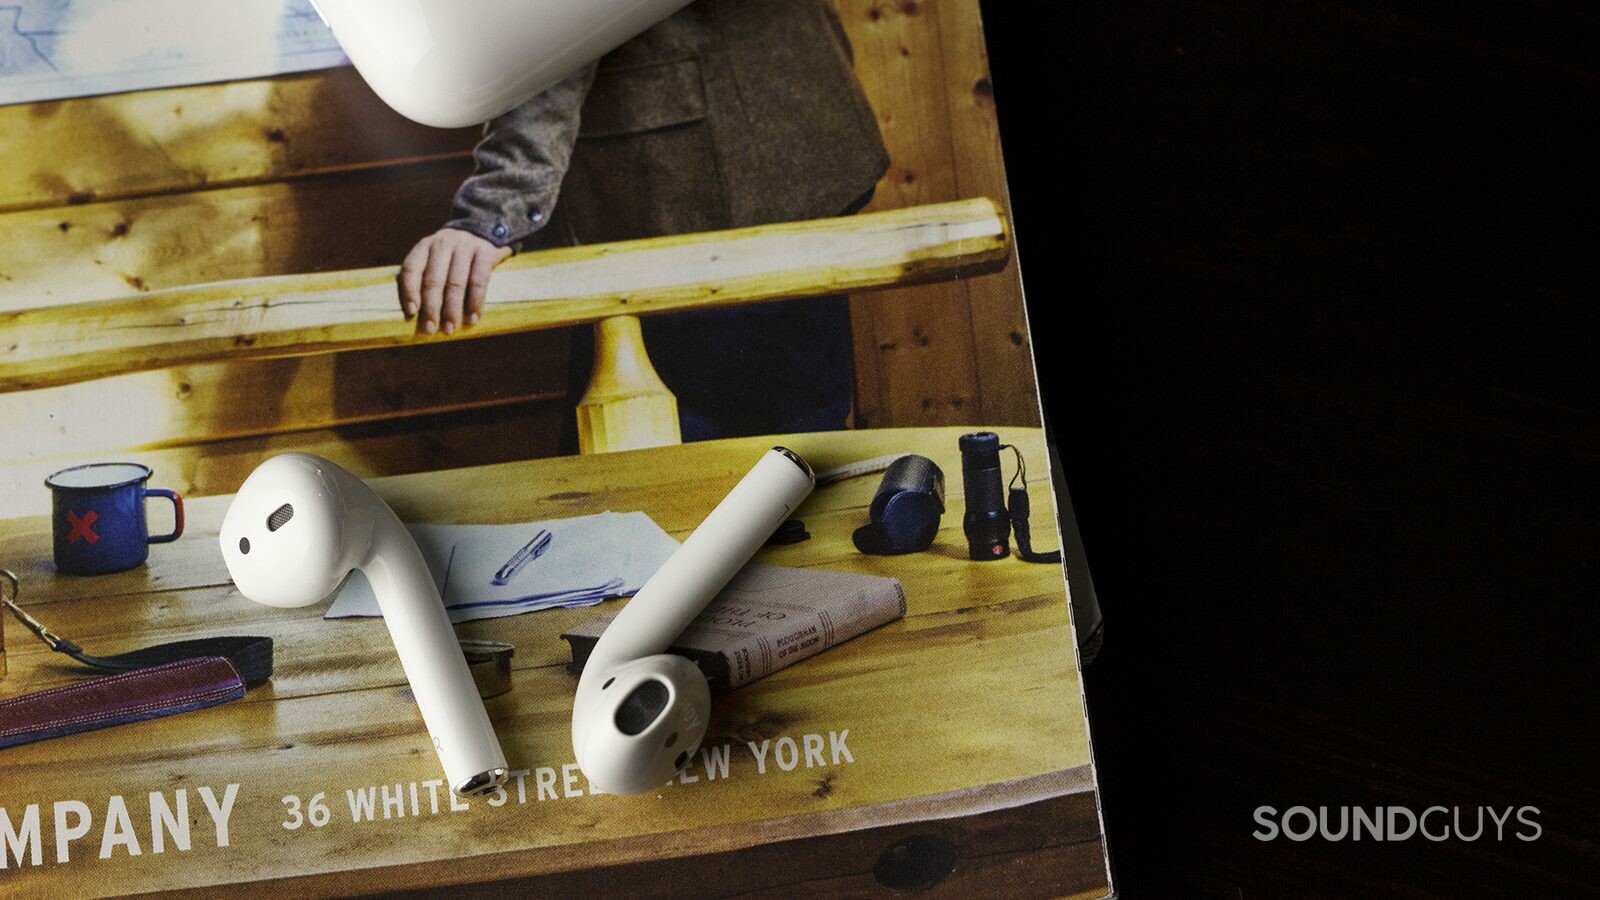 The Apple Airpods are easy to connect, if they're connecting to an iOS device. Android-users will have a more fraught time. Pictured: Apple Earpods laid on a magazine page with the small carrying case at the top portion of the image.